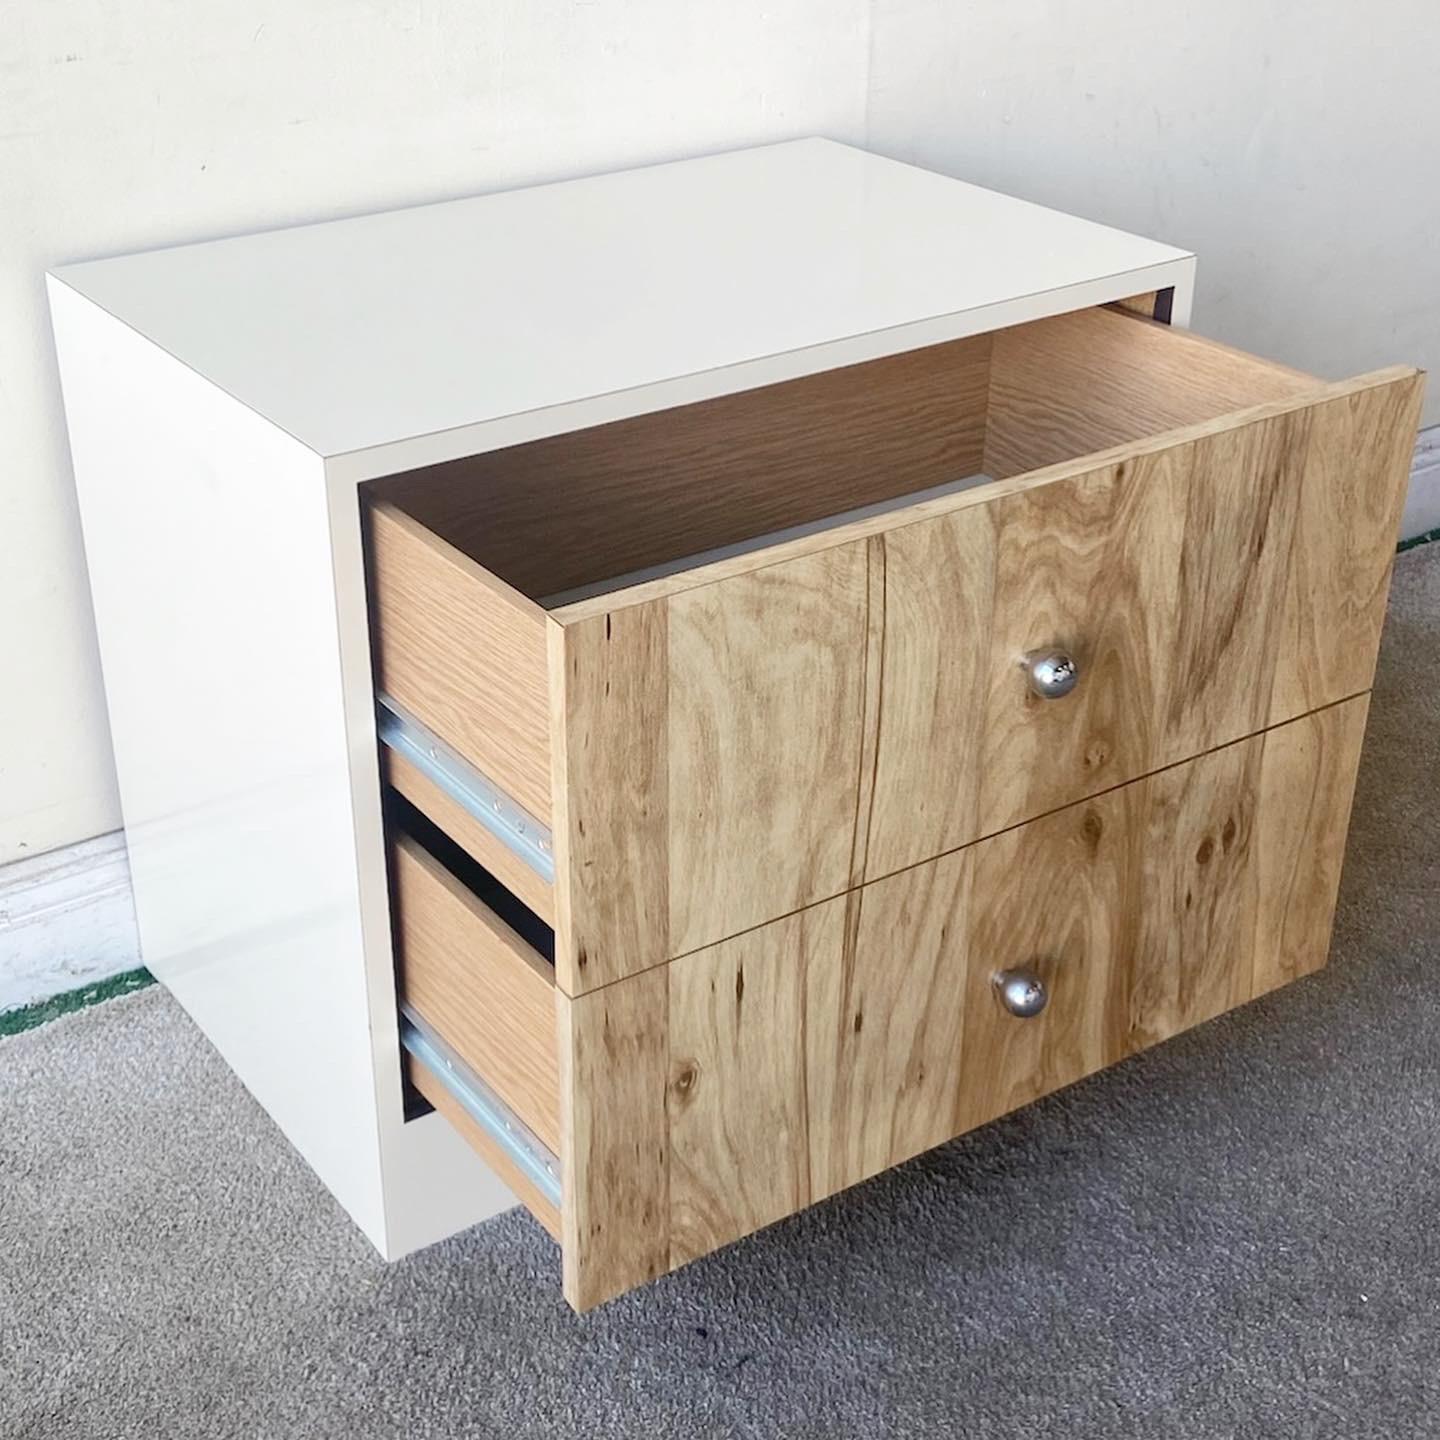 Exceptional postmodern nightstand/end table. Features a cream lacquer and Woodgrain laminate with 2 spacious drawer. Each drawer has a chrome knob.

Additional information:
Material: Wood
Color: Cream
Style: Postmodern
Time Period: